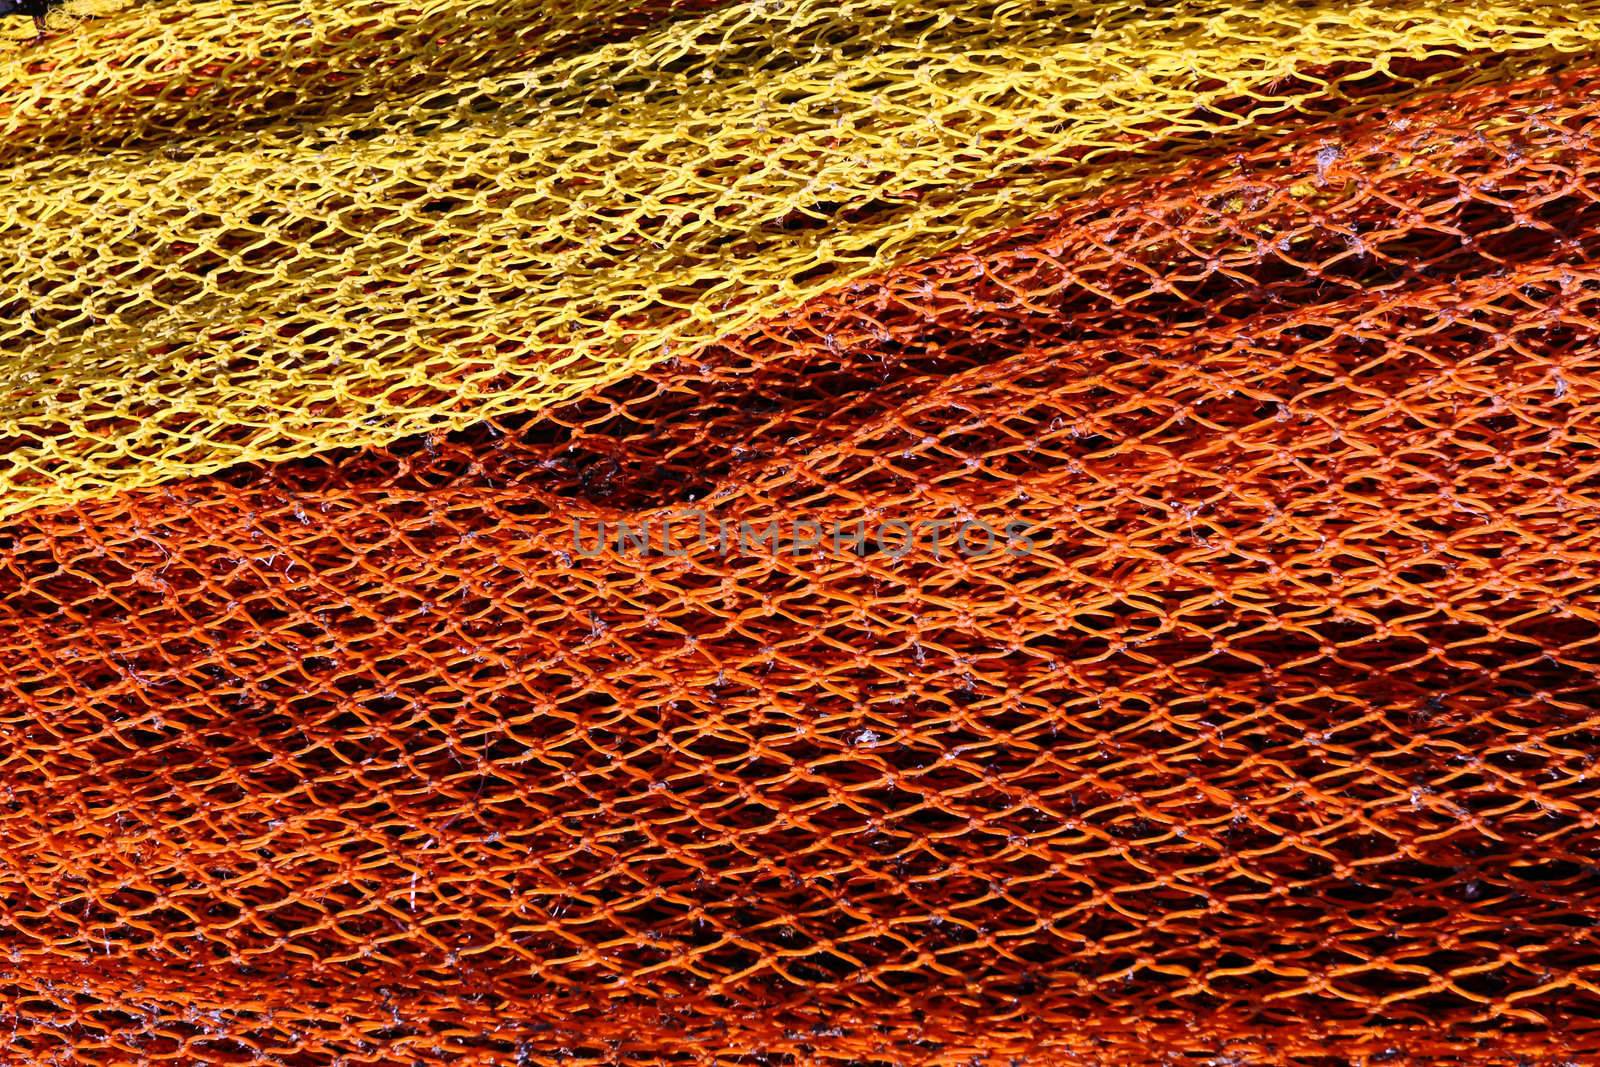 Red and yellow fishnet by shamtor